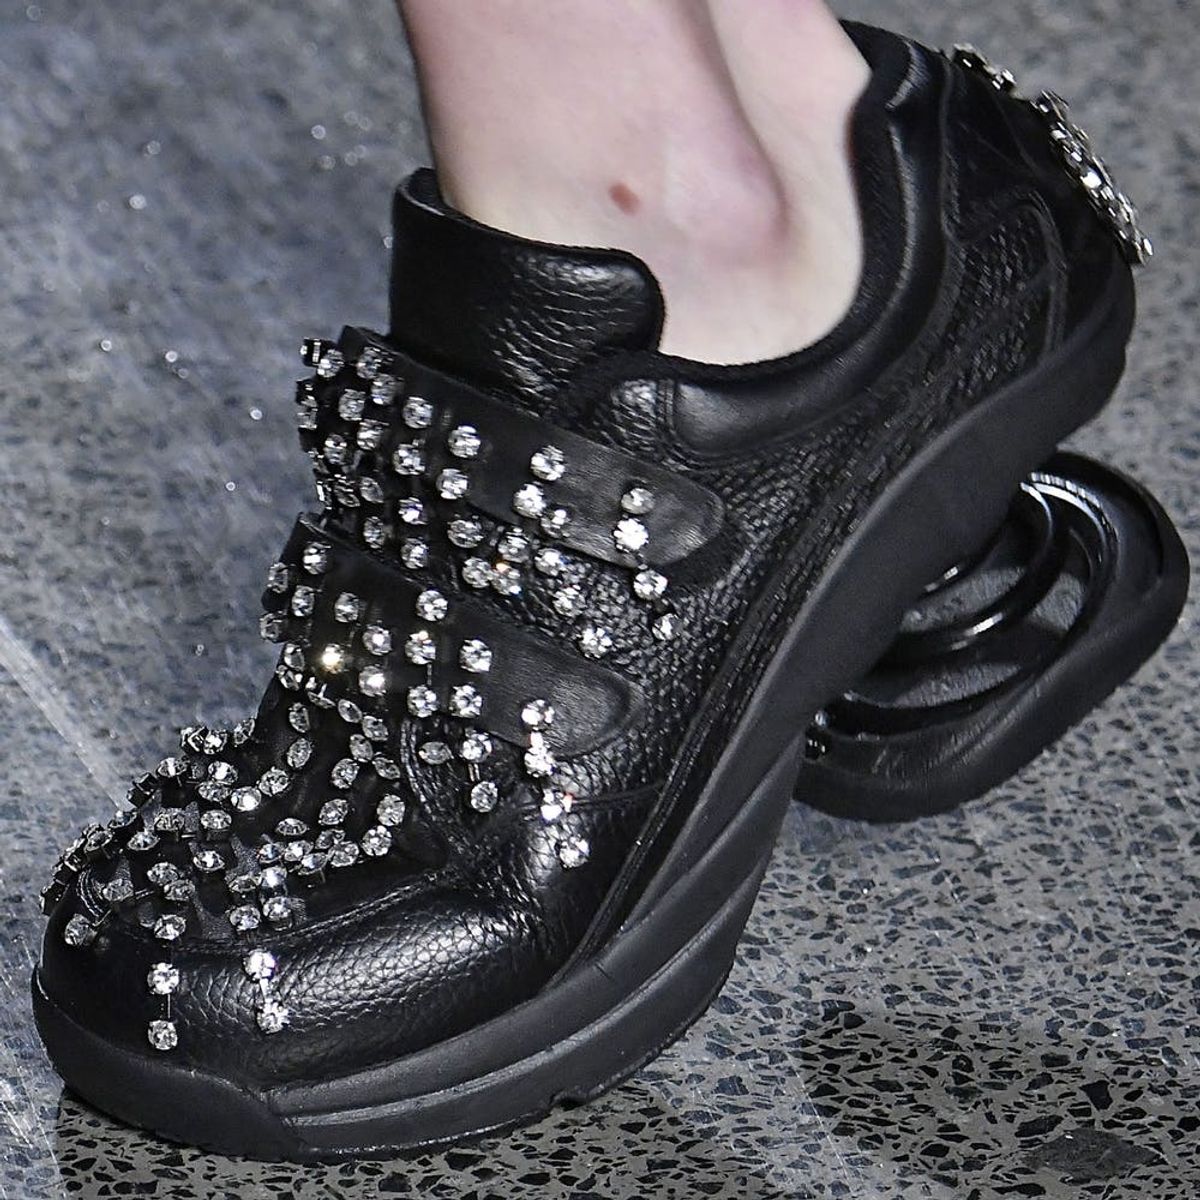 Christopher Kane Just Sent Tricked-Out Orthopedic Shoes Down the Runway